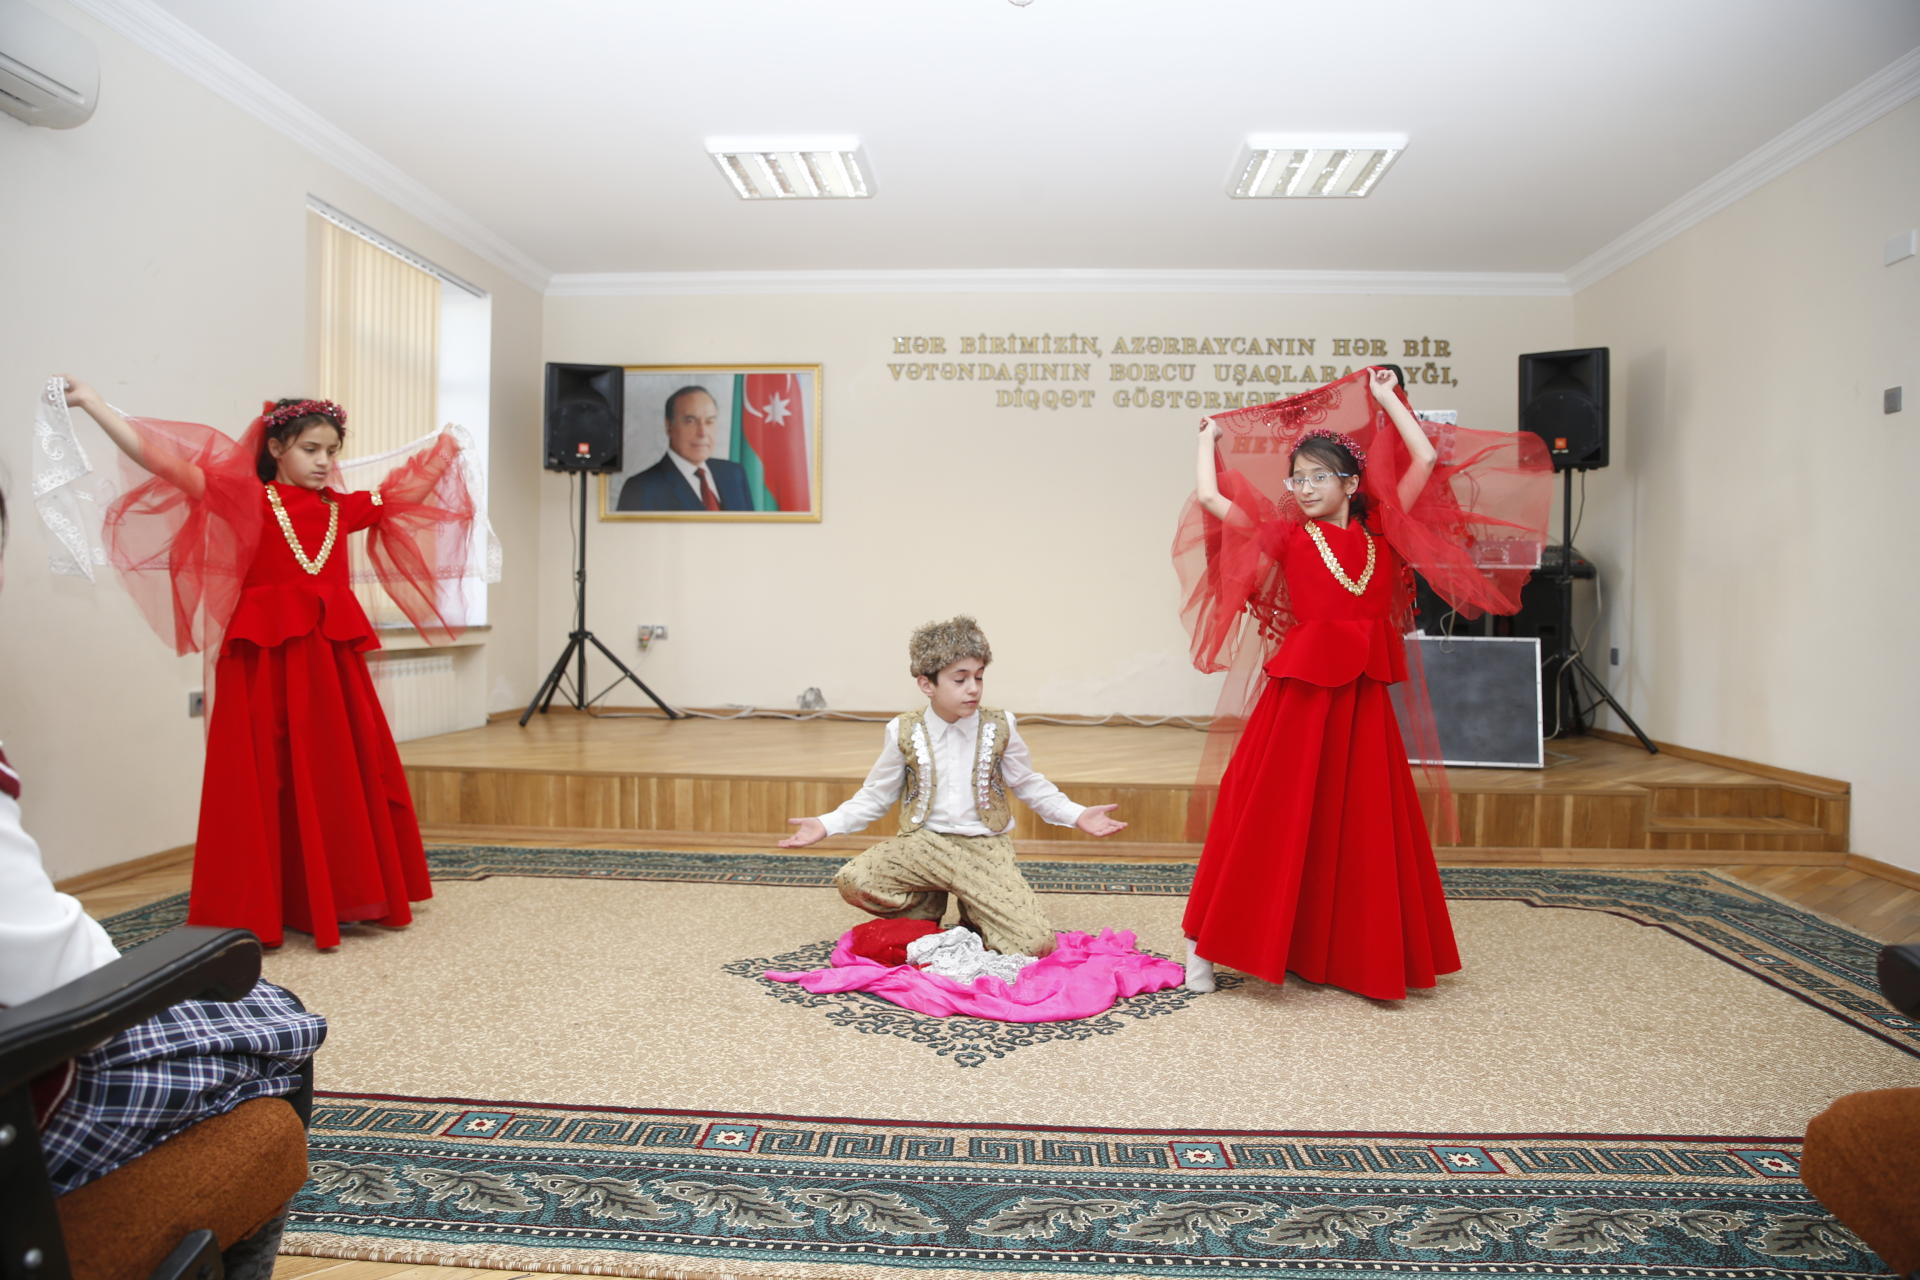 Heydar Aliyev Foundation VP visits special boarding schools for physically disabled children (PHOTO)